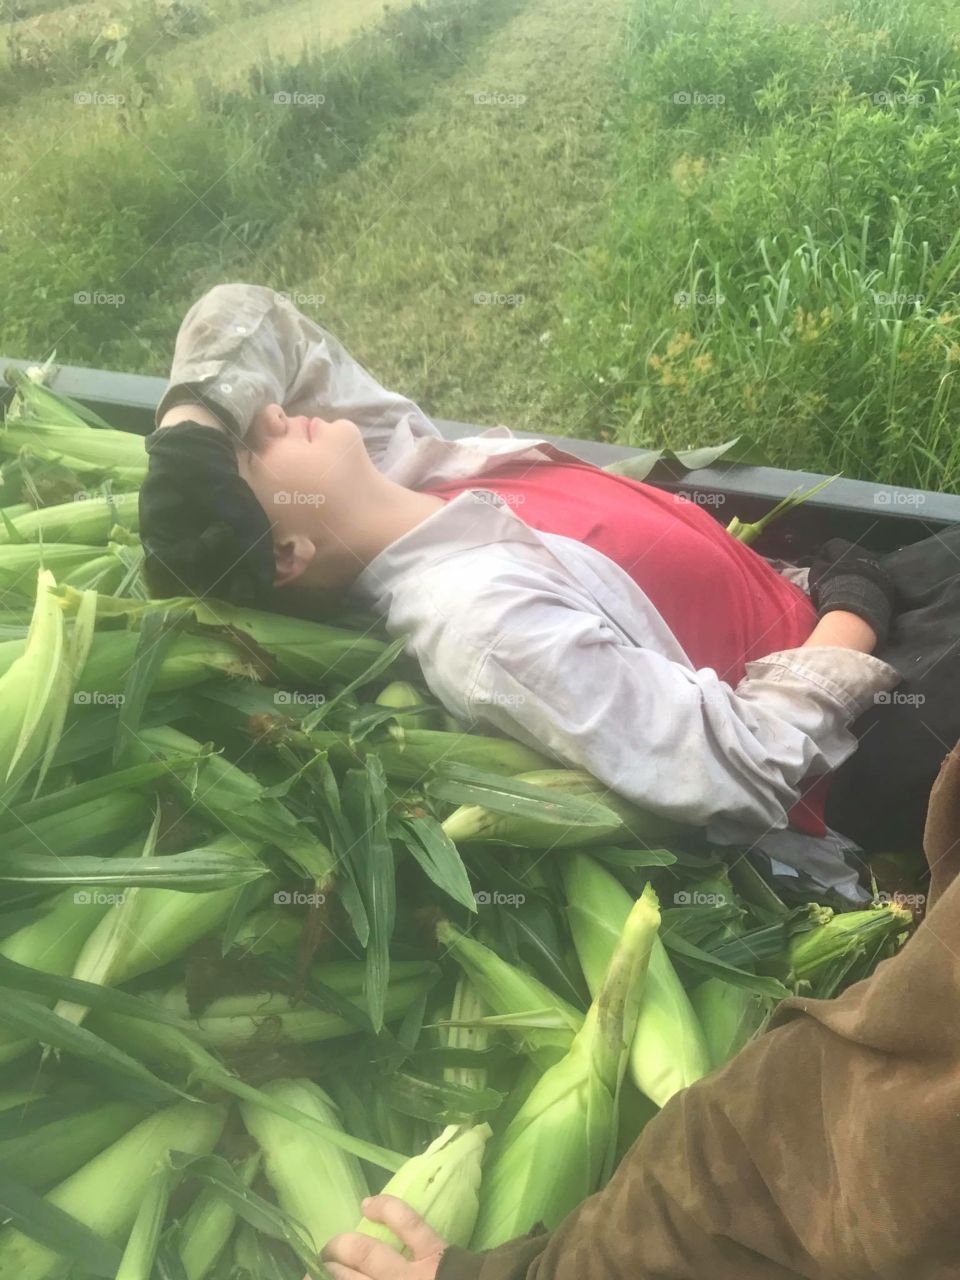 Picked a wagon load of corn bright and early in the morning... wore him out to exhaustion! 